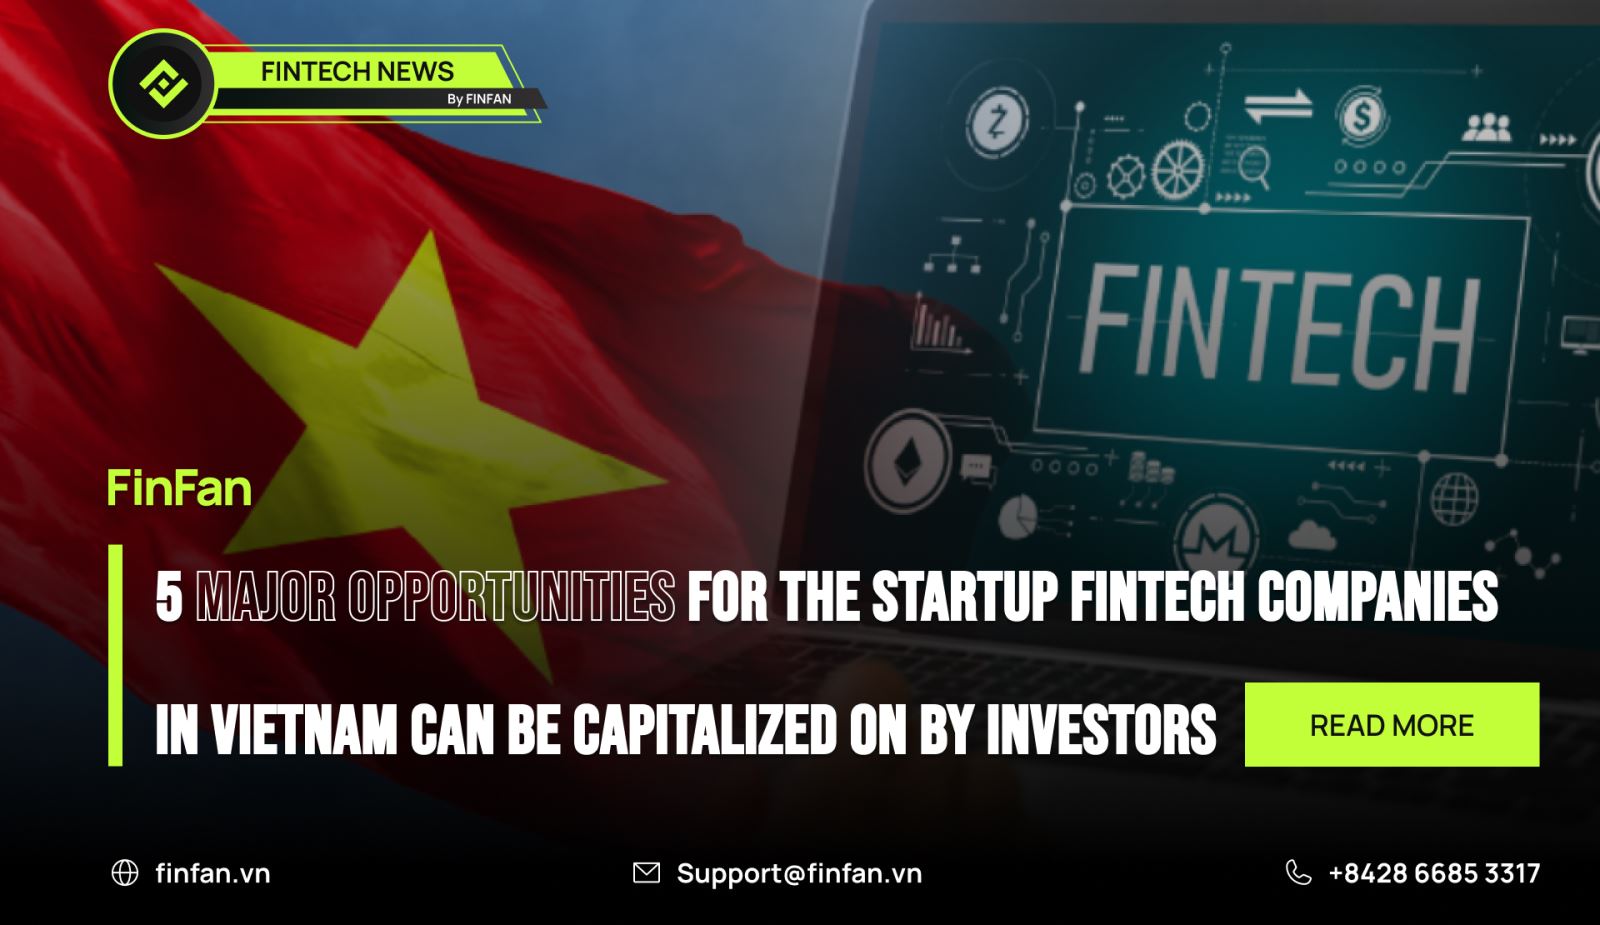 5 major opportunities for the startup fintech companies in Vietnam can be capitalized on by investors